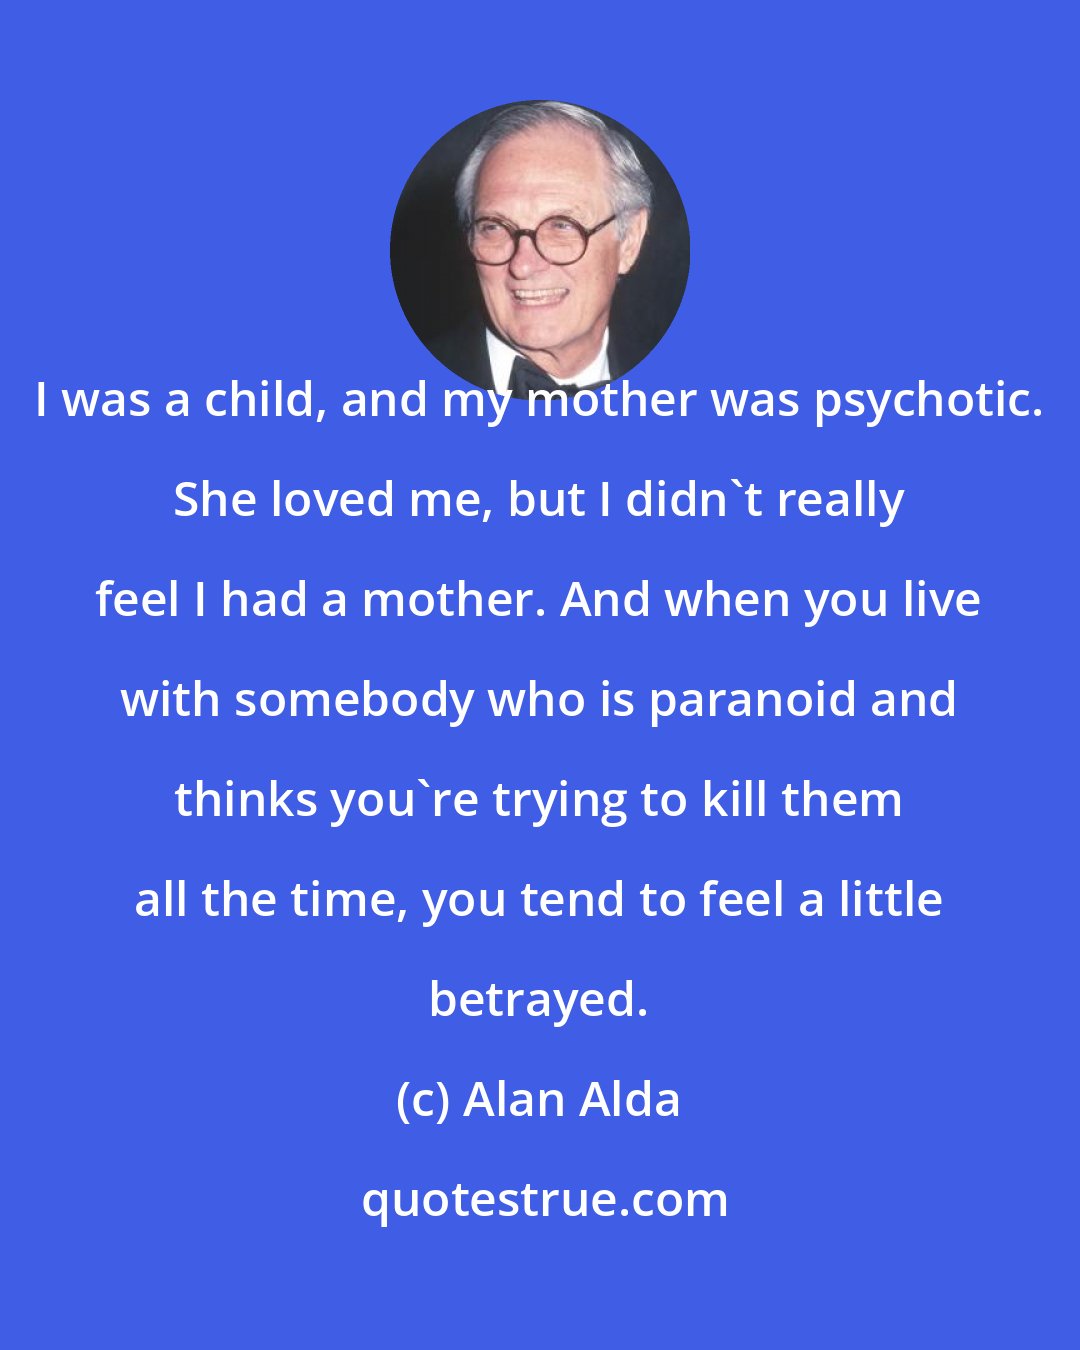 Alan Alda: I was a child, and my mother was psychotic. She loved me, but I didn't really feel I had a mother. And when you live with somebody who is paranoid and thinks you're trying to kill them all the time, you tend to feel a little betrayed.